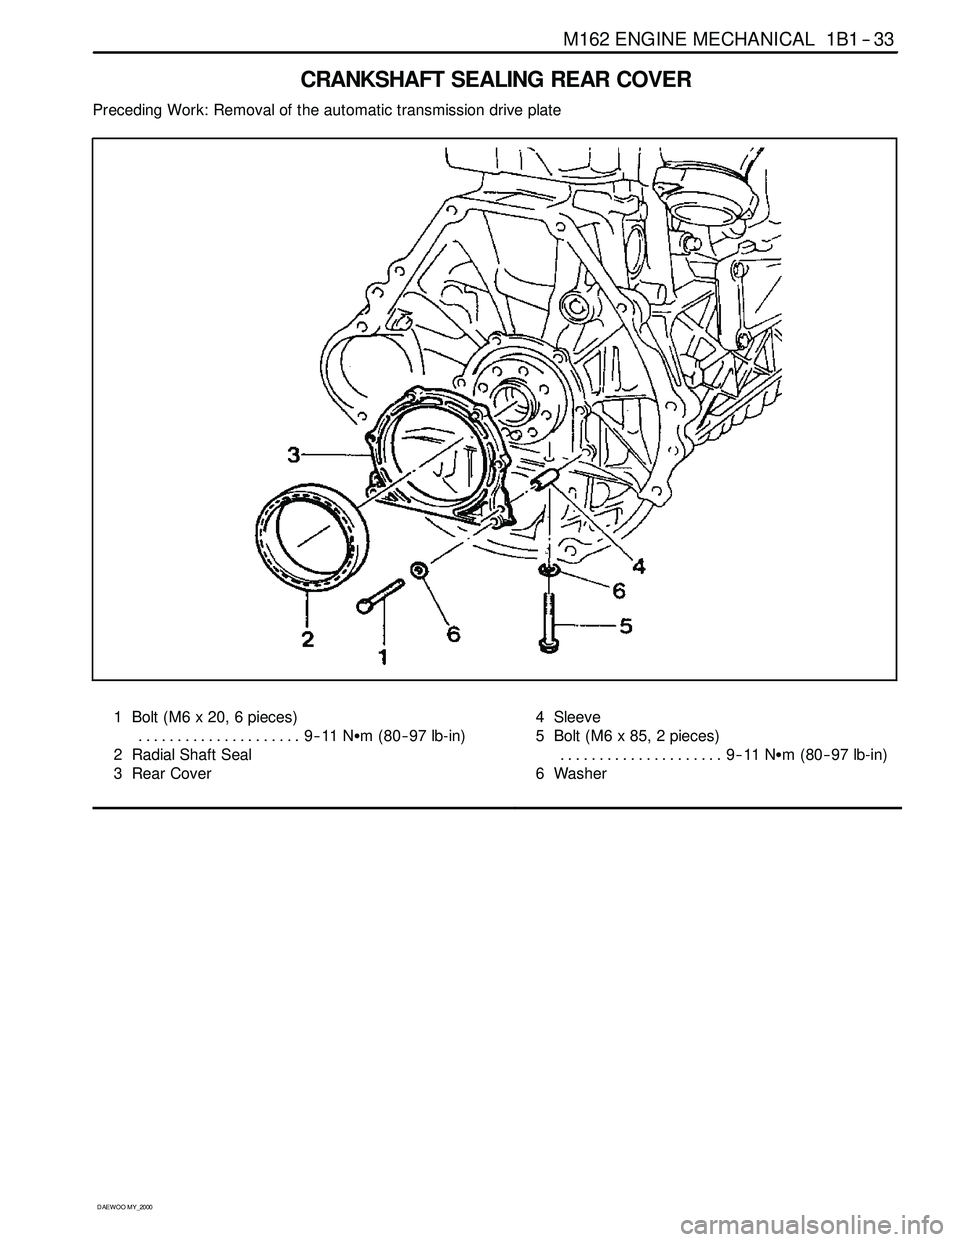 SSANGYONG KORANDO 1997  Service Repair Manual M162 ENGINE MECHANICAL 1B1 -- 33
D AEW OO M Y_2000
CRANKSHAFT SEALING REAR COVER
Preceding Work: Removal of the automatic transmission drive plate
1 Bolt (M6 x 20, 6 pieces)
9--11 NSm (80-- 97 lb-in) 